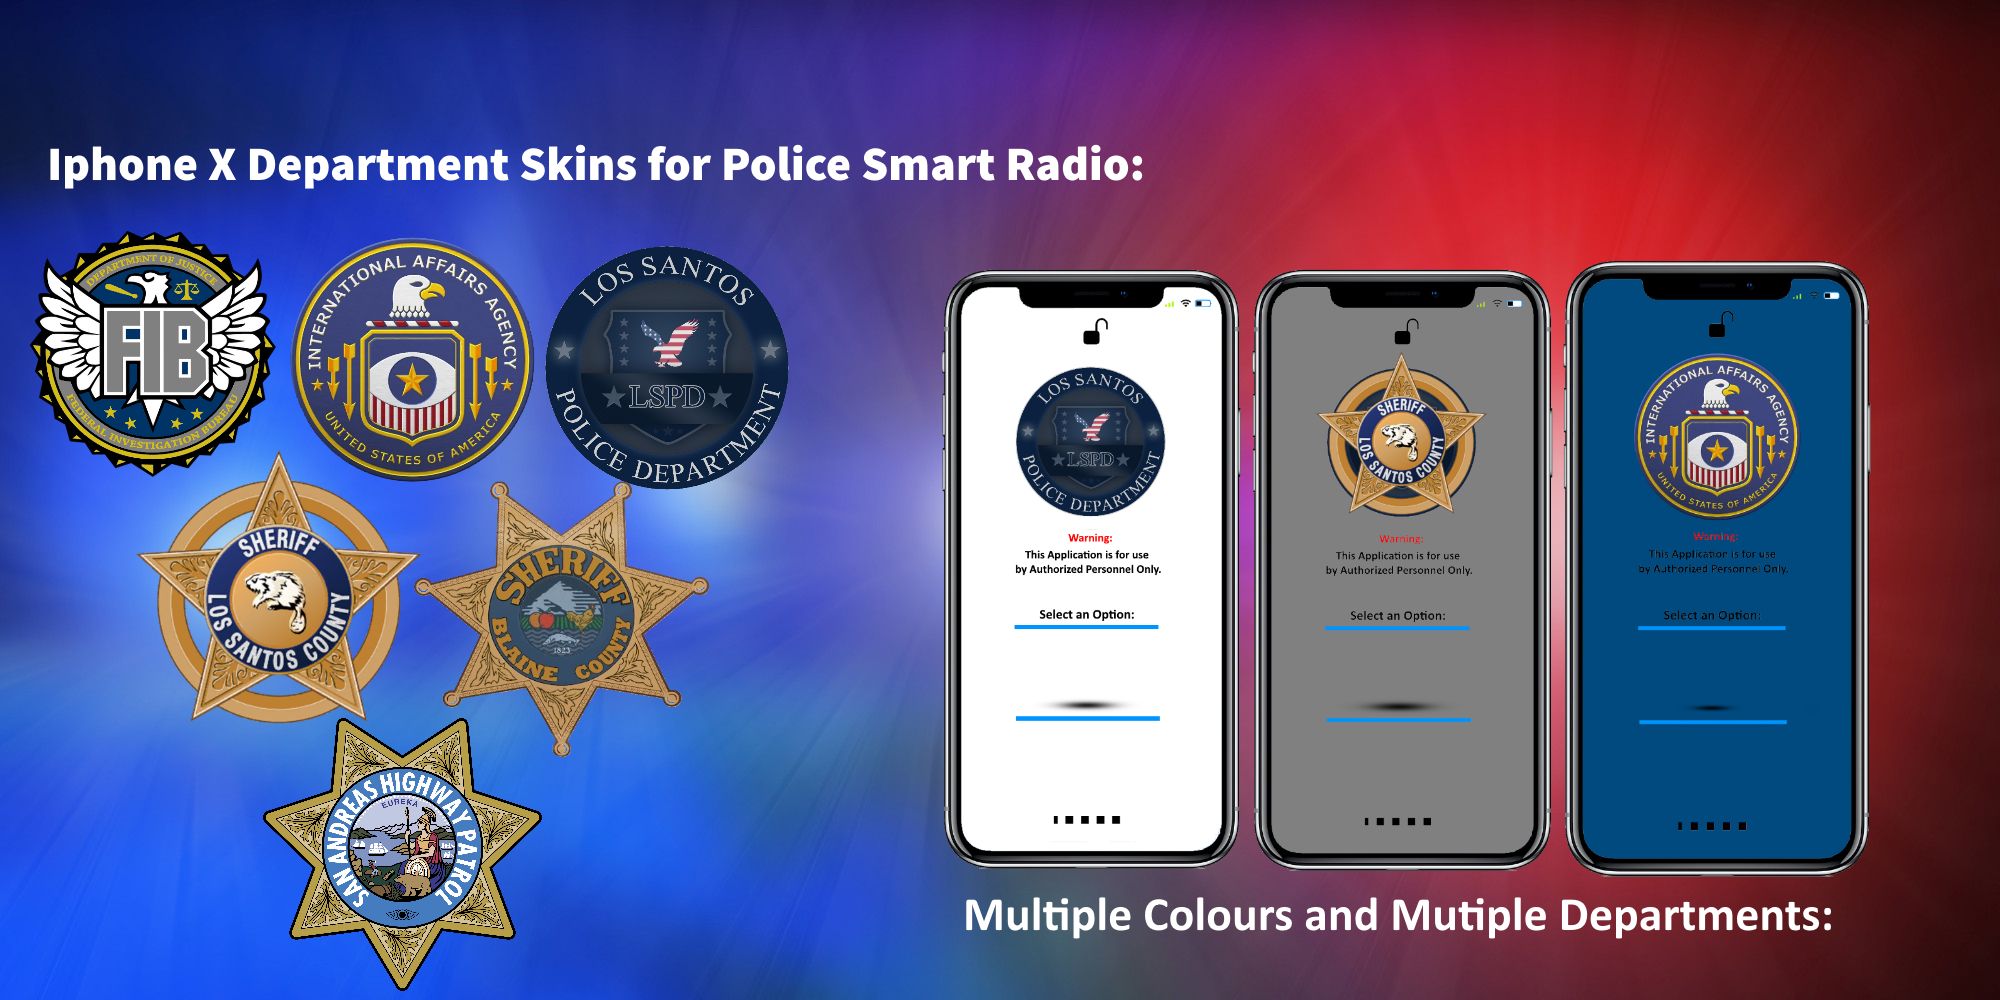 Iphone X Skins for Police Smart Radio